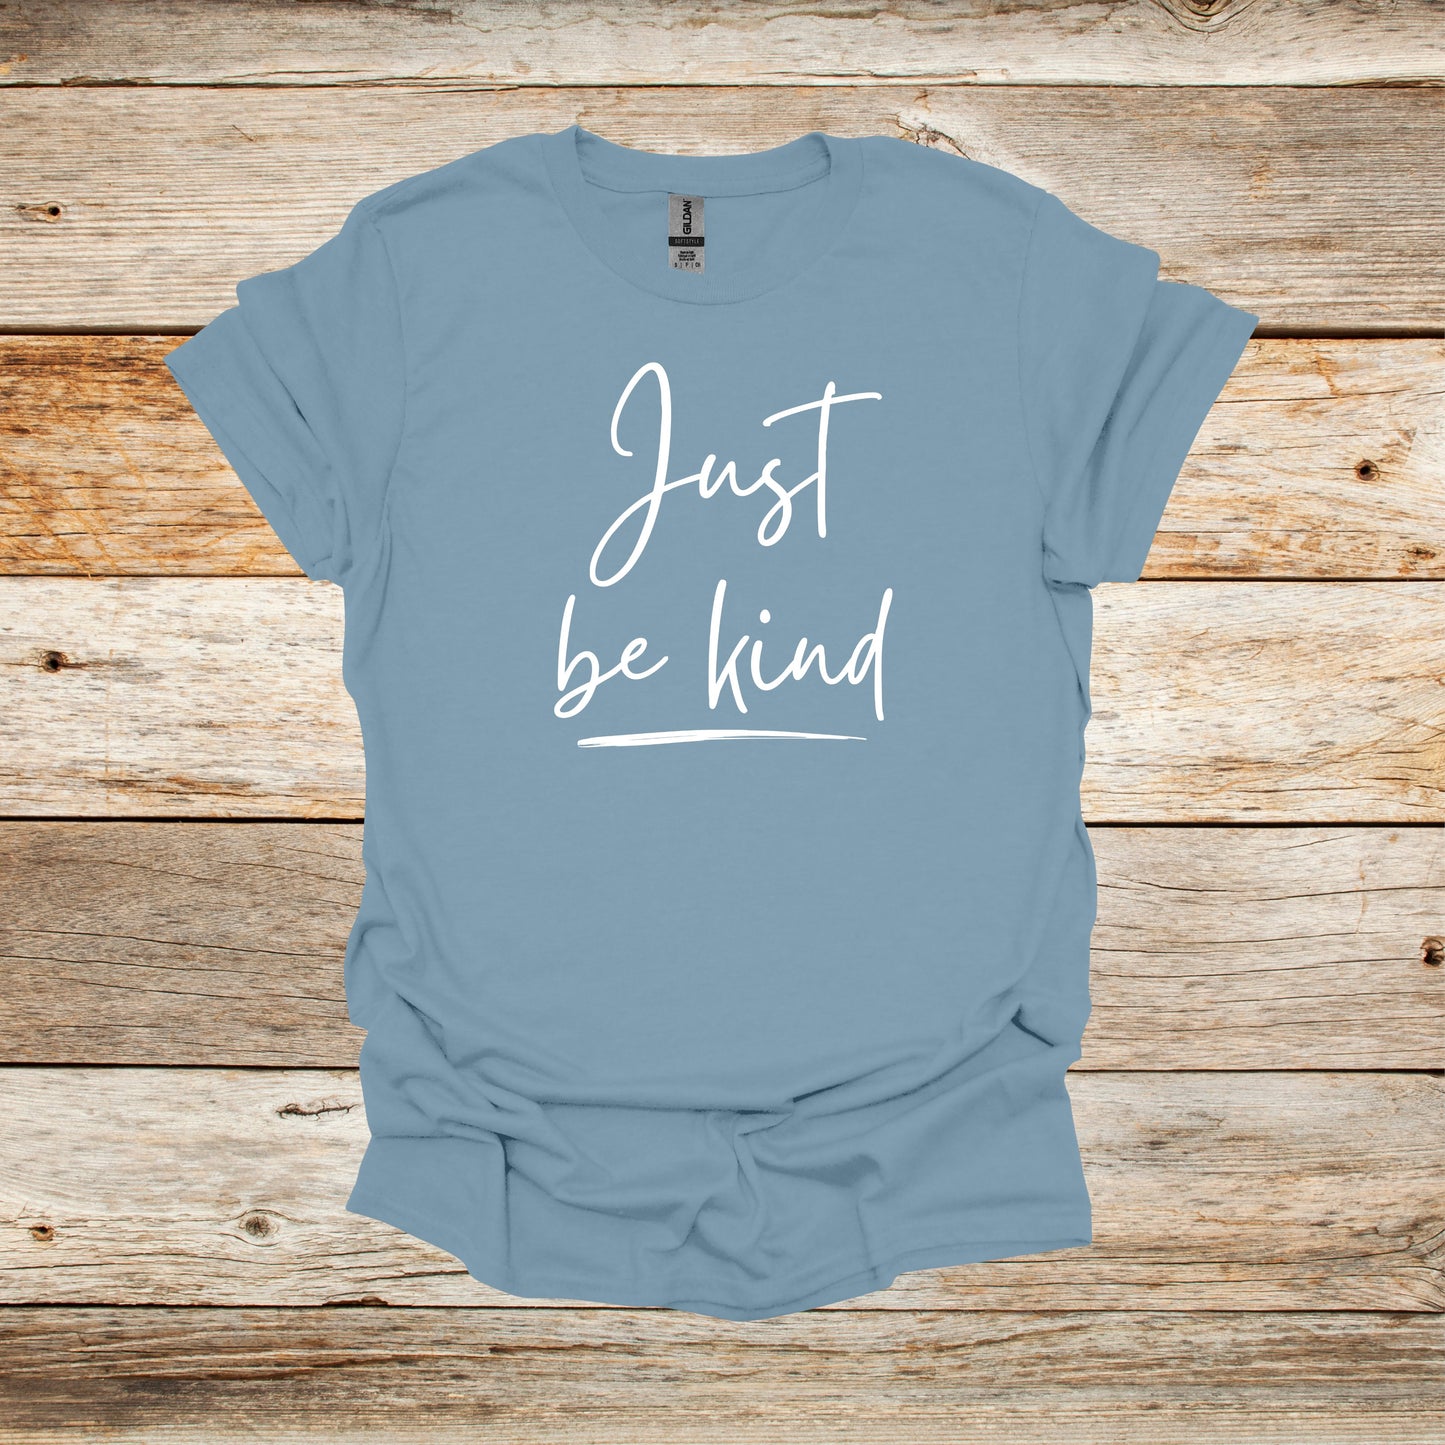 Sayings T-Shirt - Just Be Kind - Men's and Women's Tee Shirts - Sayings T-Shirts Graphic Avenue Stone Blue Adult Small 